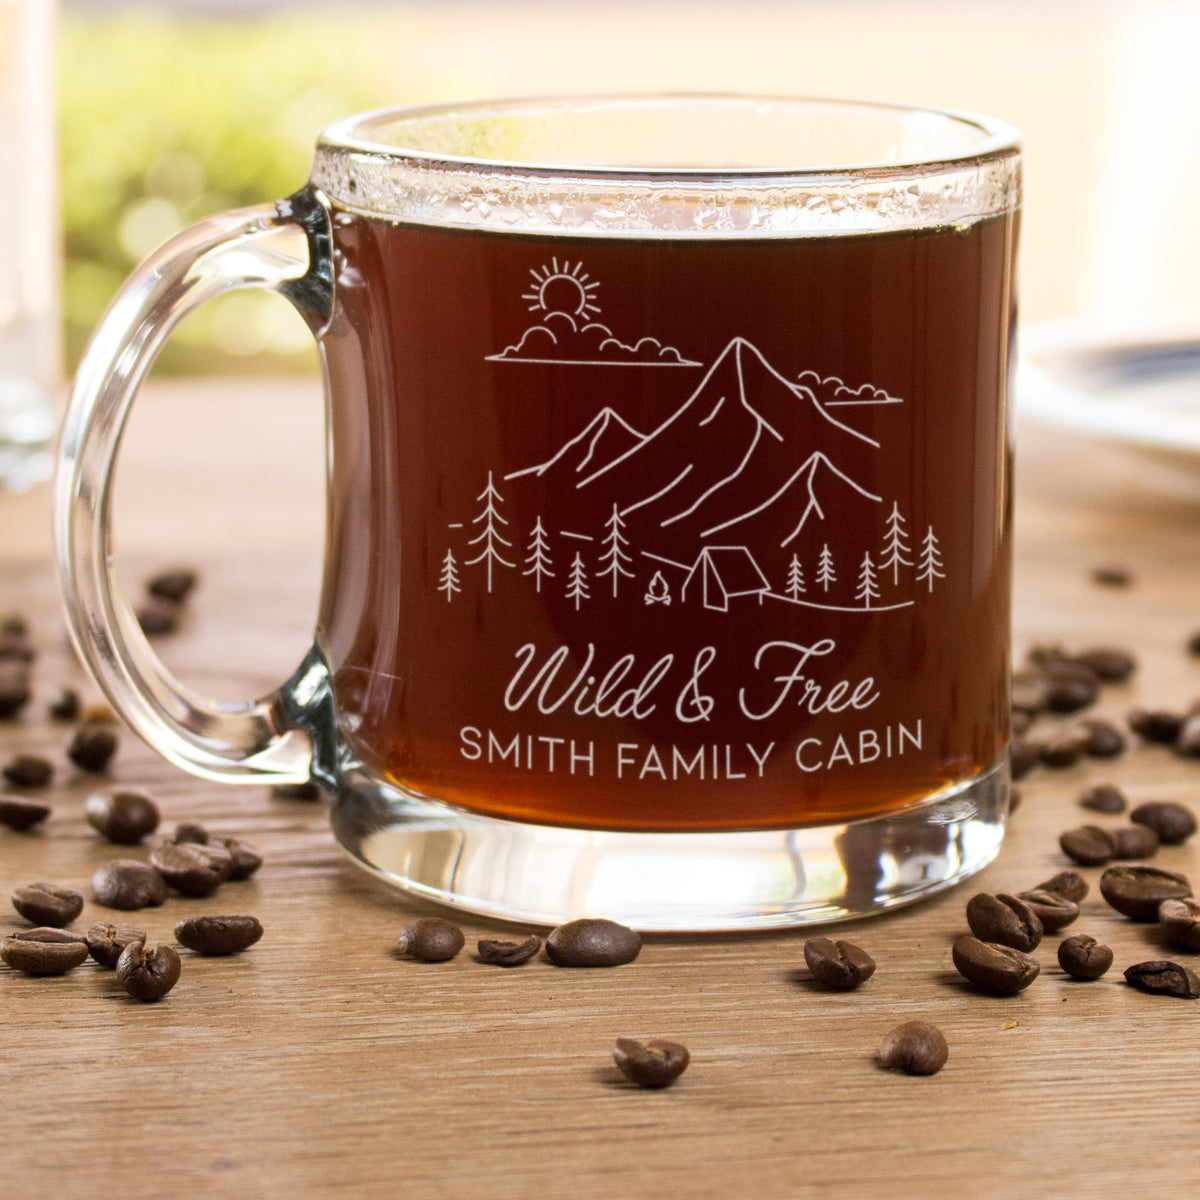 Personalized Camping Cup, Design: OD1 - Everything Etched